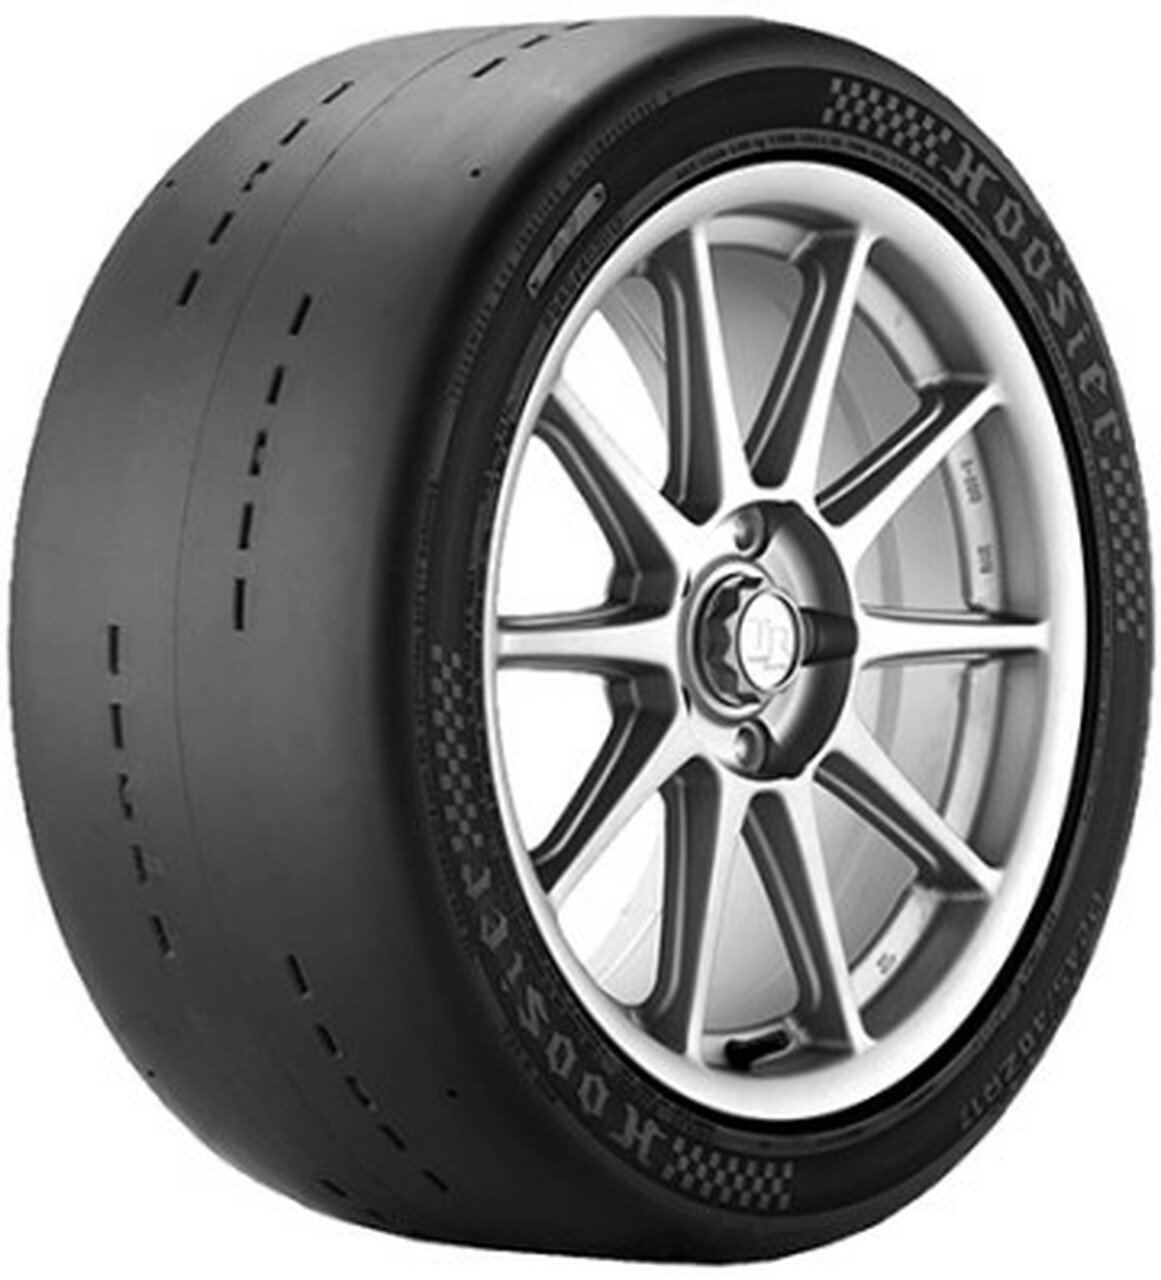 Hoosier Tarmac Rally Tire - 13 inches